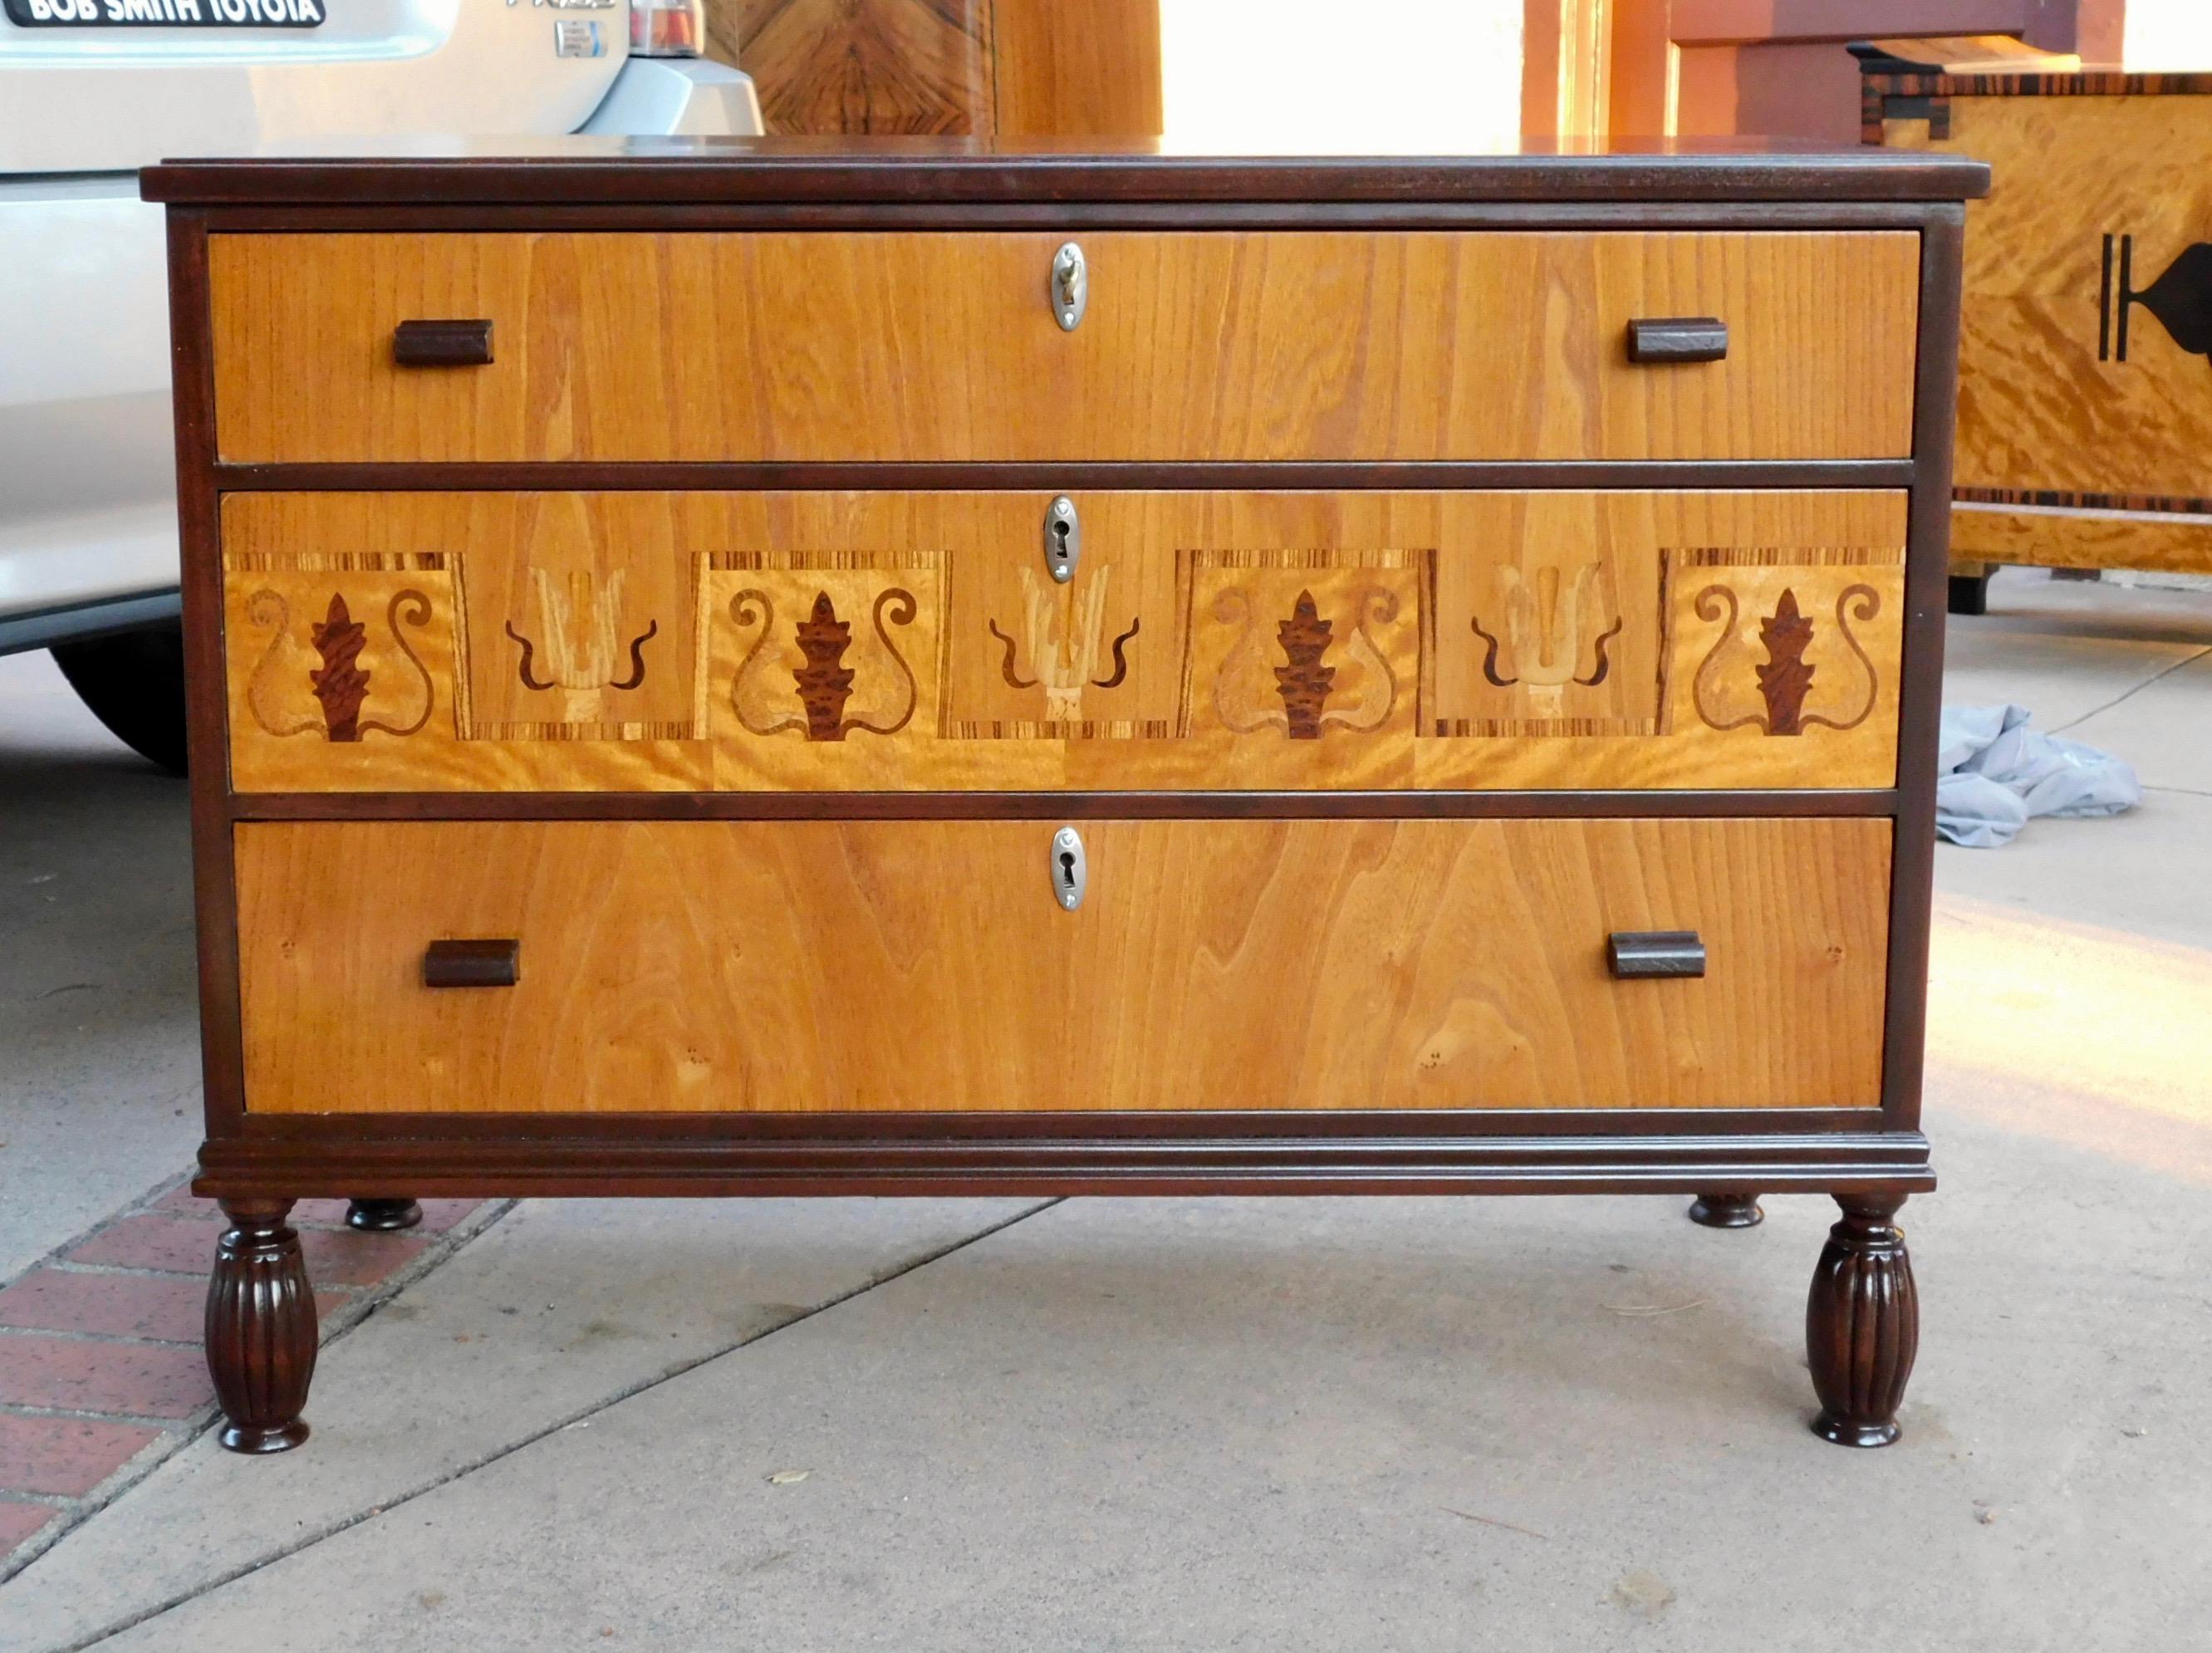 Swedish Art Deco chest of drawers/dresser (three drawers).
Crafted in South Sweden in the 1930s in elm, and birch woods and inlaid in birch root, rosewood and pear.
This chest has been beautifully restored by our craftsmen. It is in beautiful